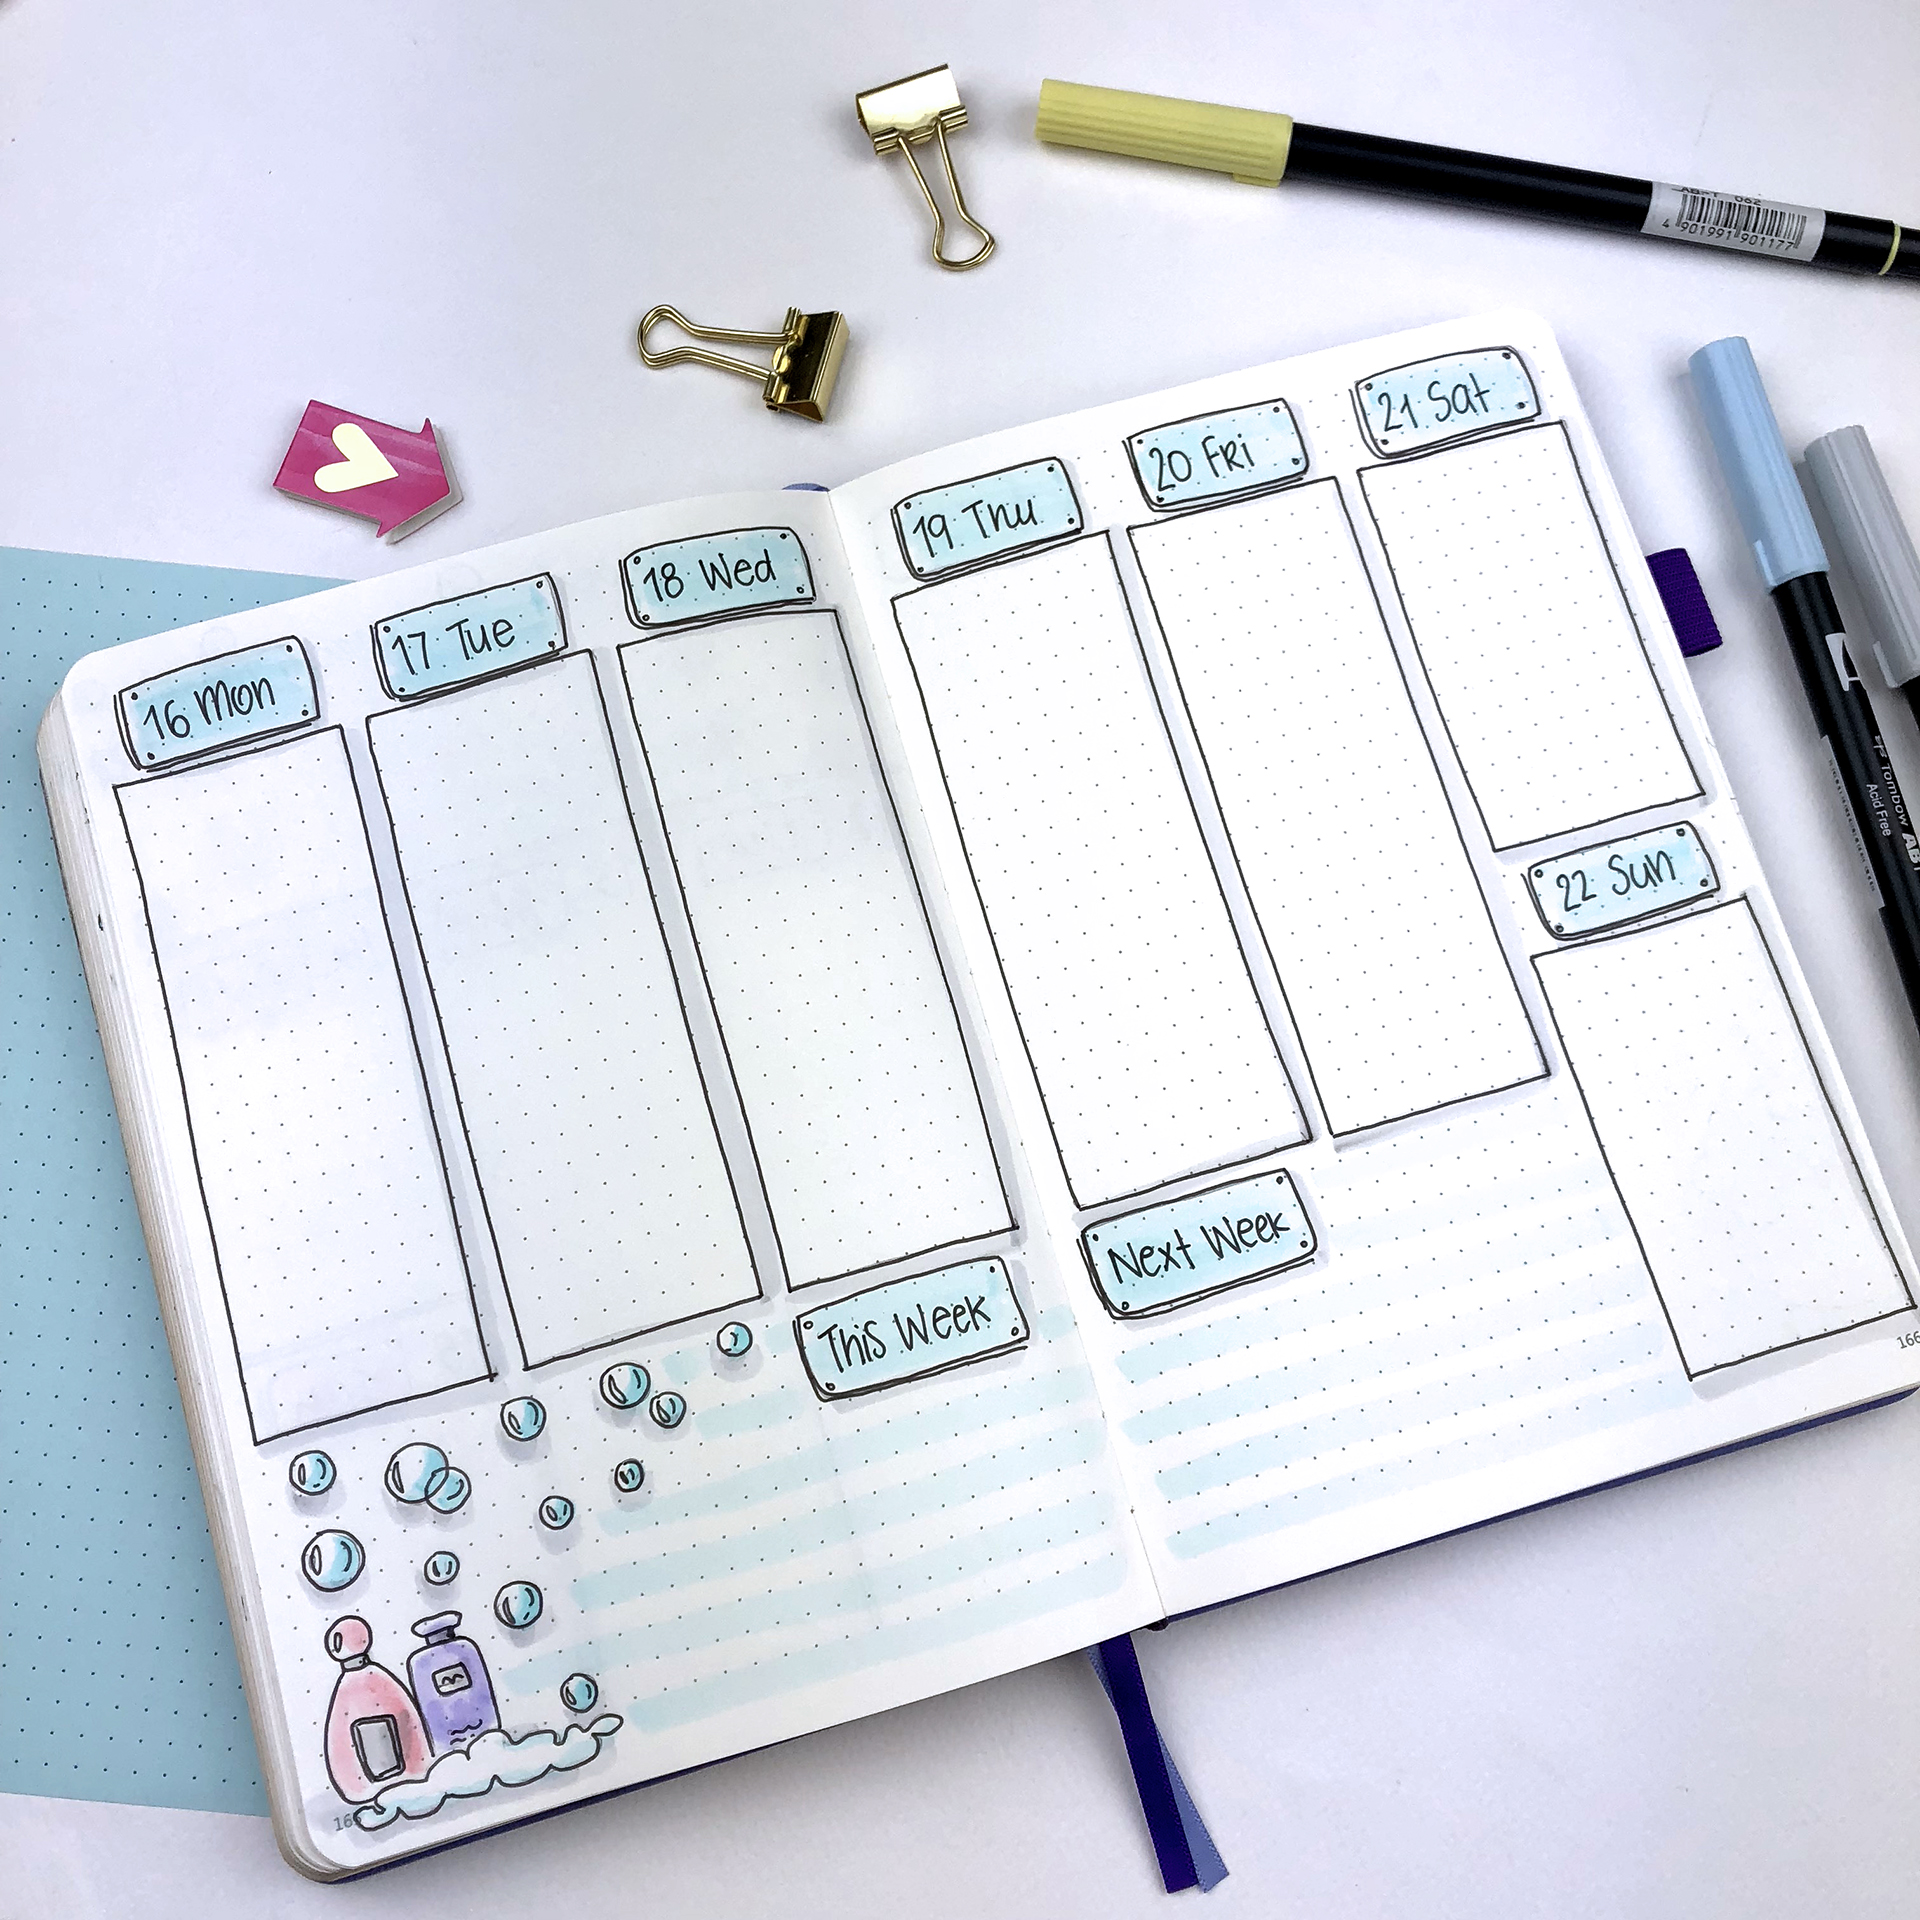 Bullet Journal Ideas: 5 Weekly Spread Layouts for July 2018 — Square ...